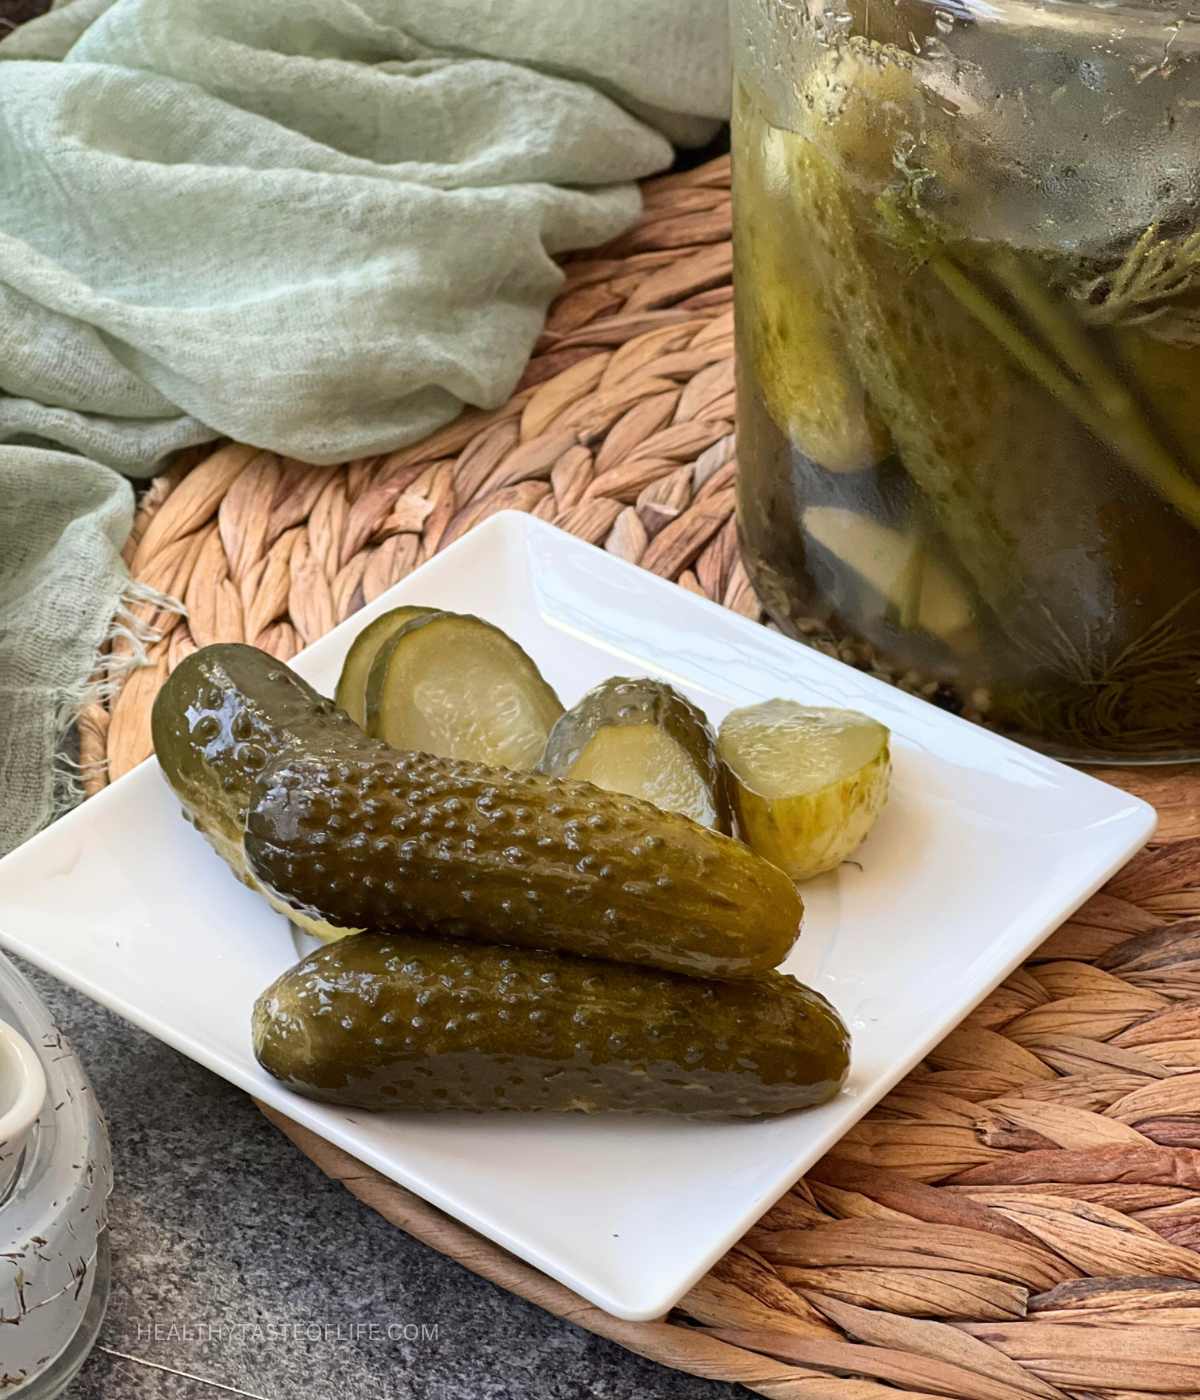 Naturally pickled cucumbers without vinegar